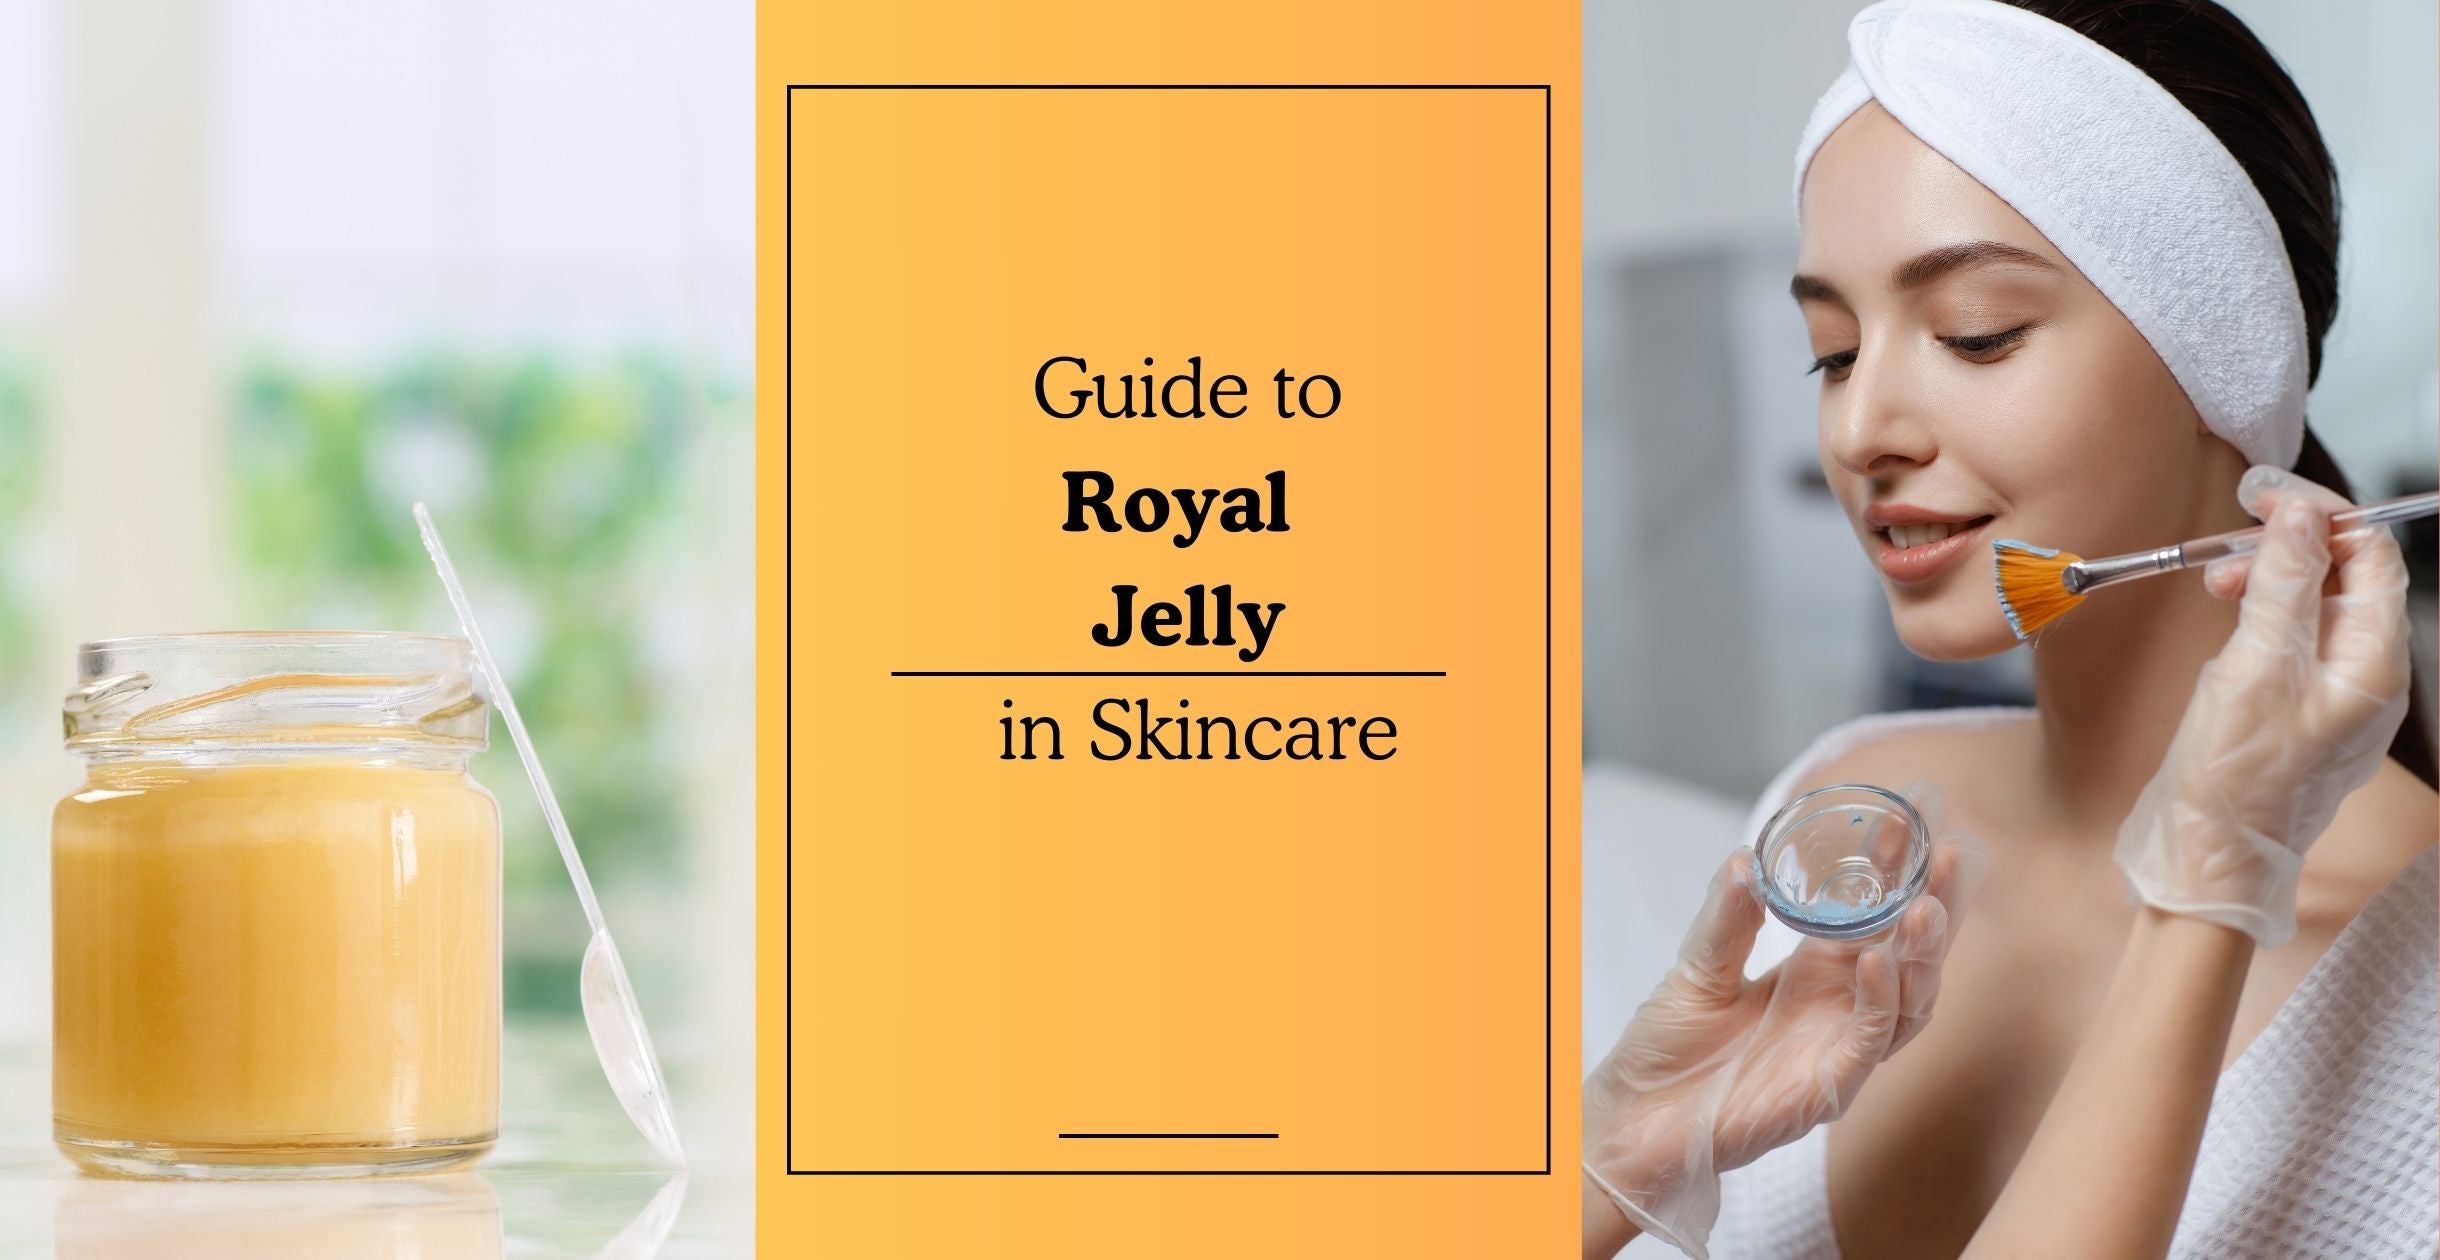 Guide to Royal Jelly in Skincare